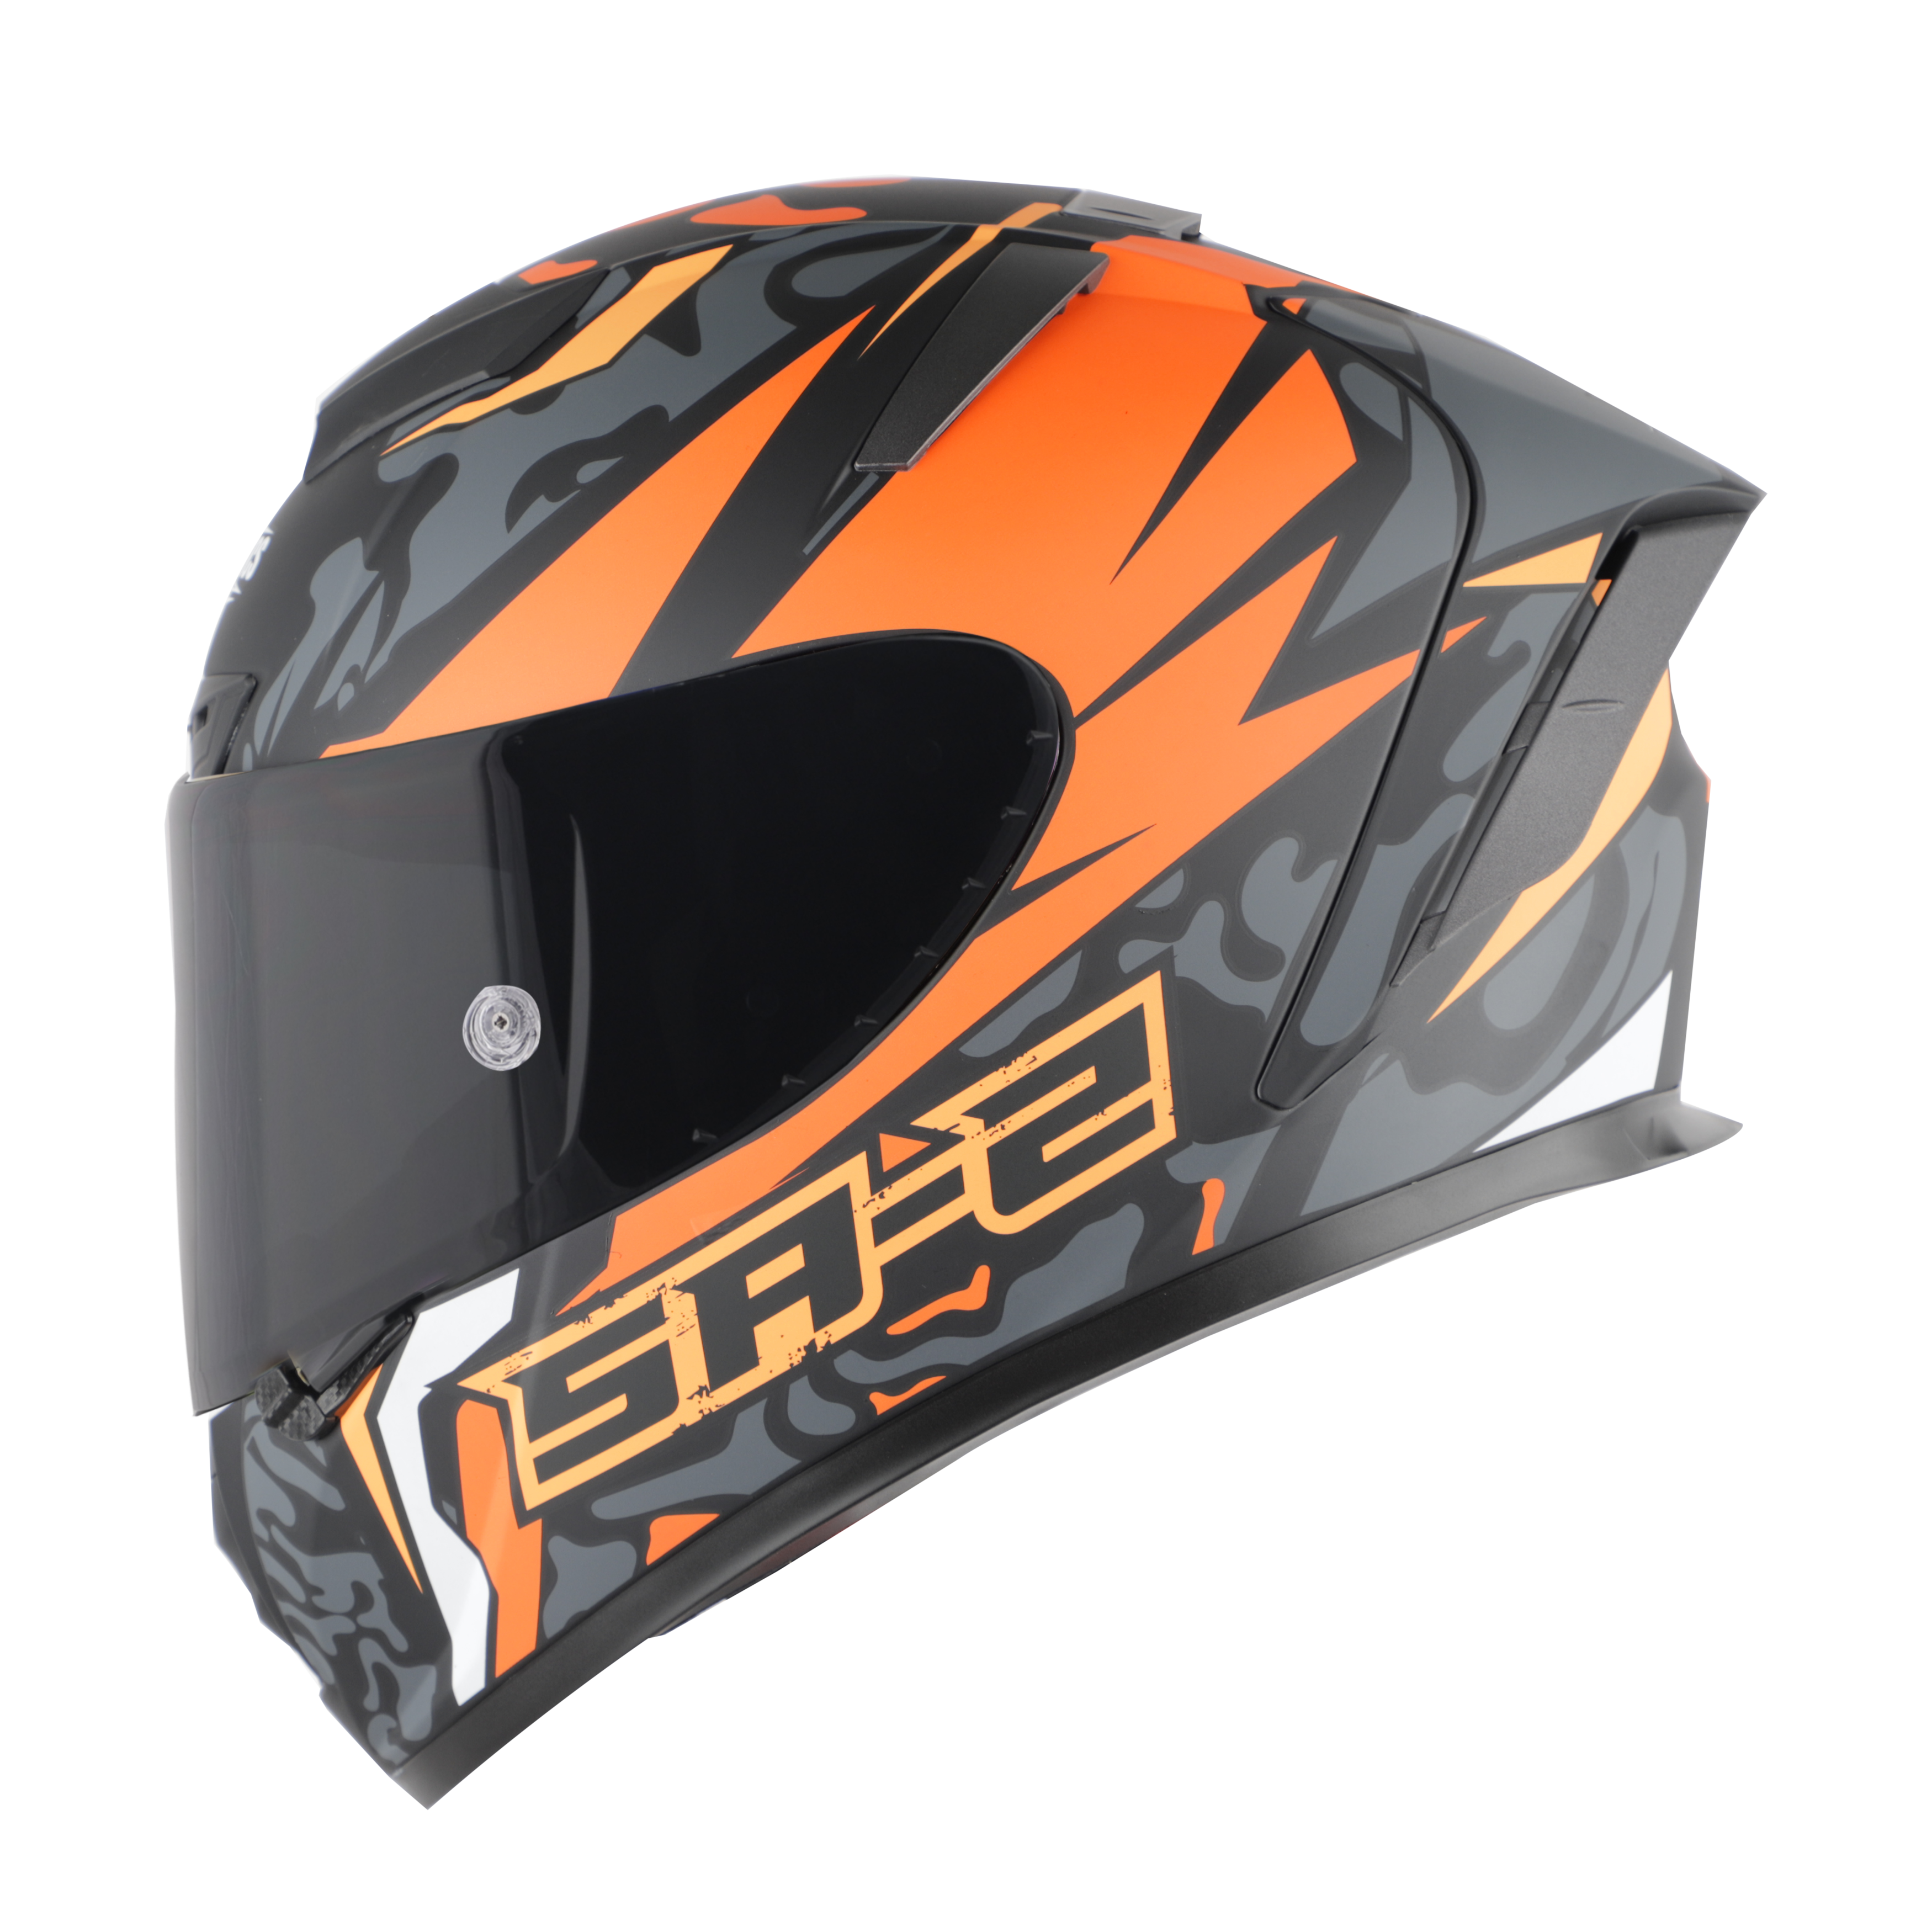 SA-2 TERMINATOR 3.0 MAT BLACK WITH ORANGE FITTED WITH CLEAR VISOR EXTRA SMOKE VISOR FREE (WITH ANTI-FOR SHIELD HOLDER)